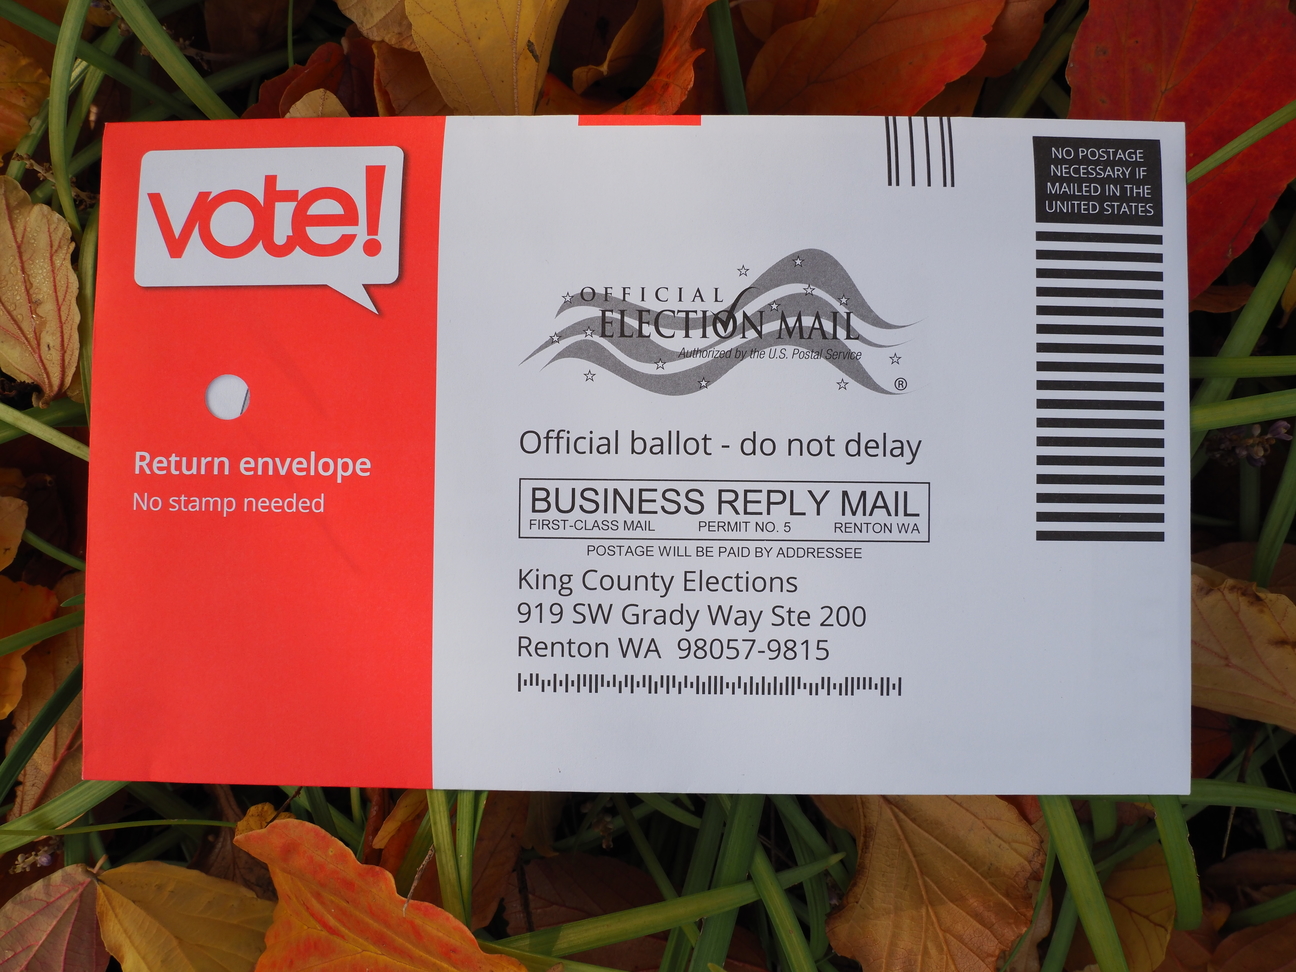 A ballot return envelope with postage prepaid